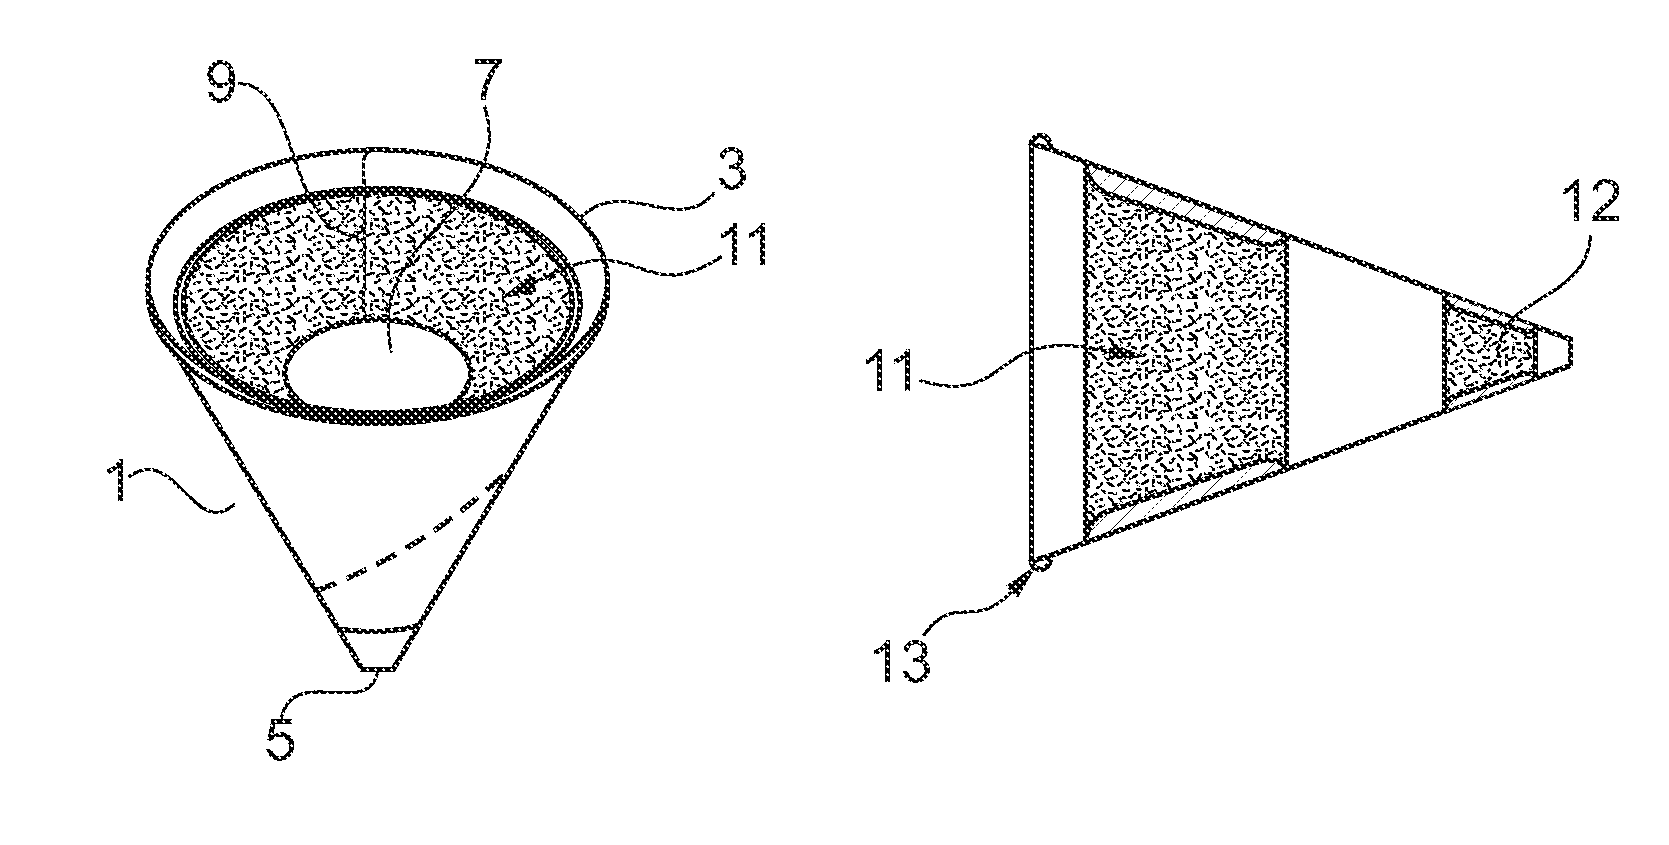 Urinary device having antiseptic and health testing properties